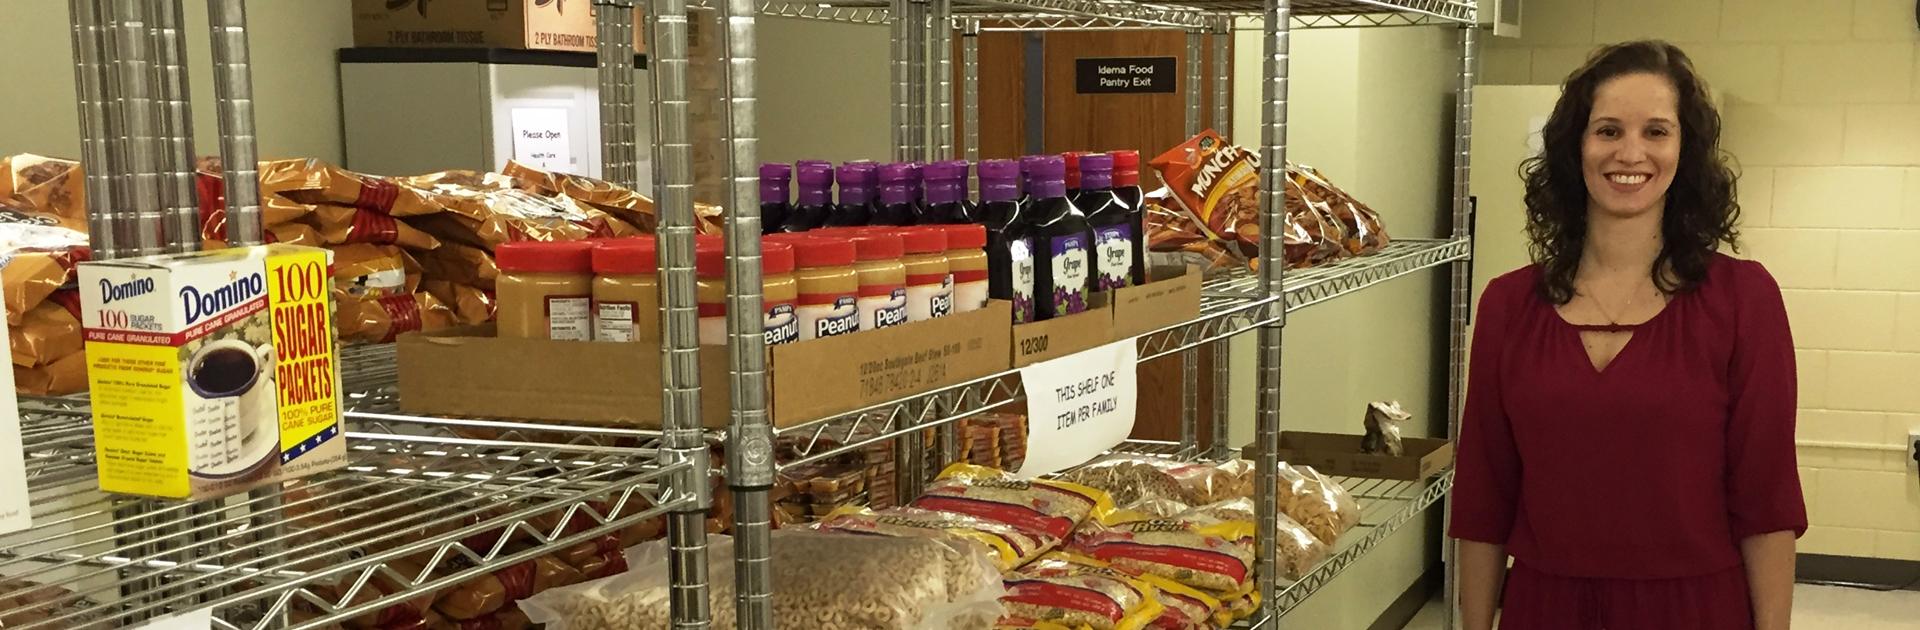 Canes Community Food Pantry